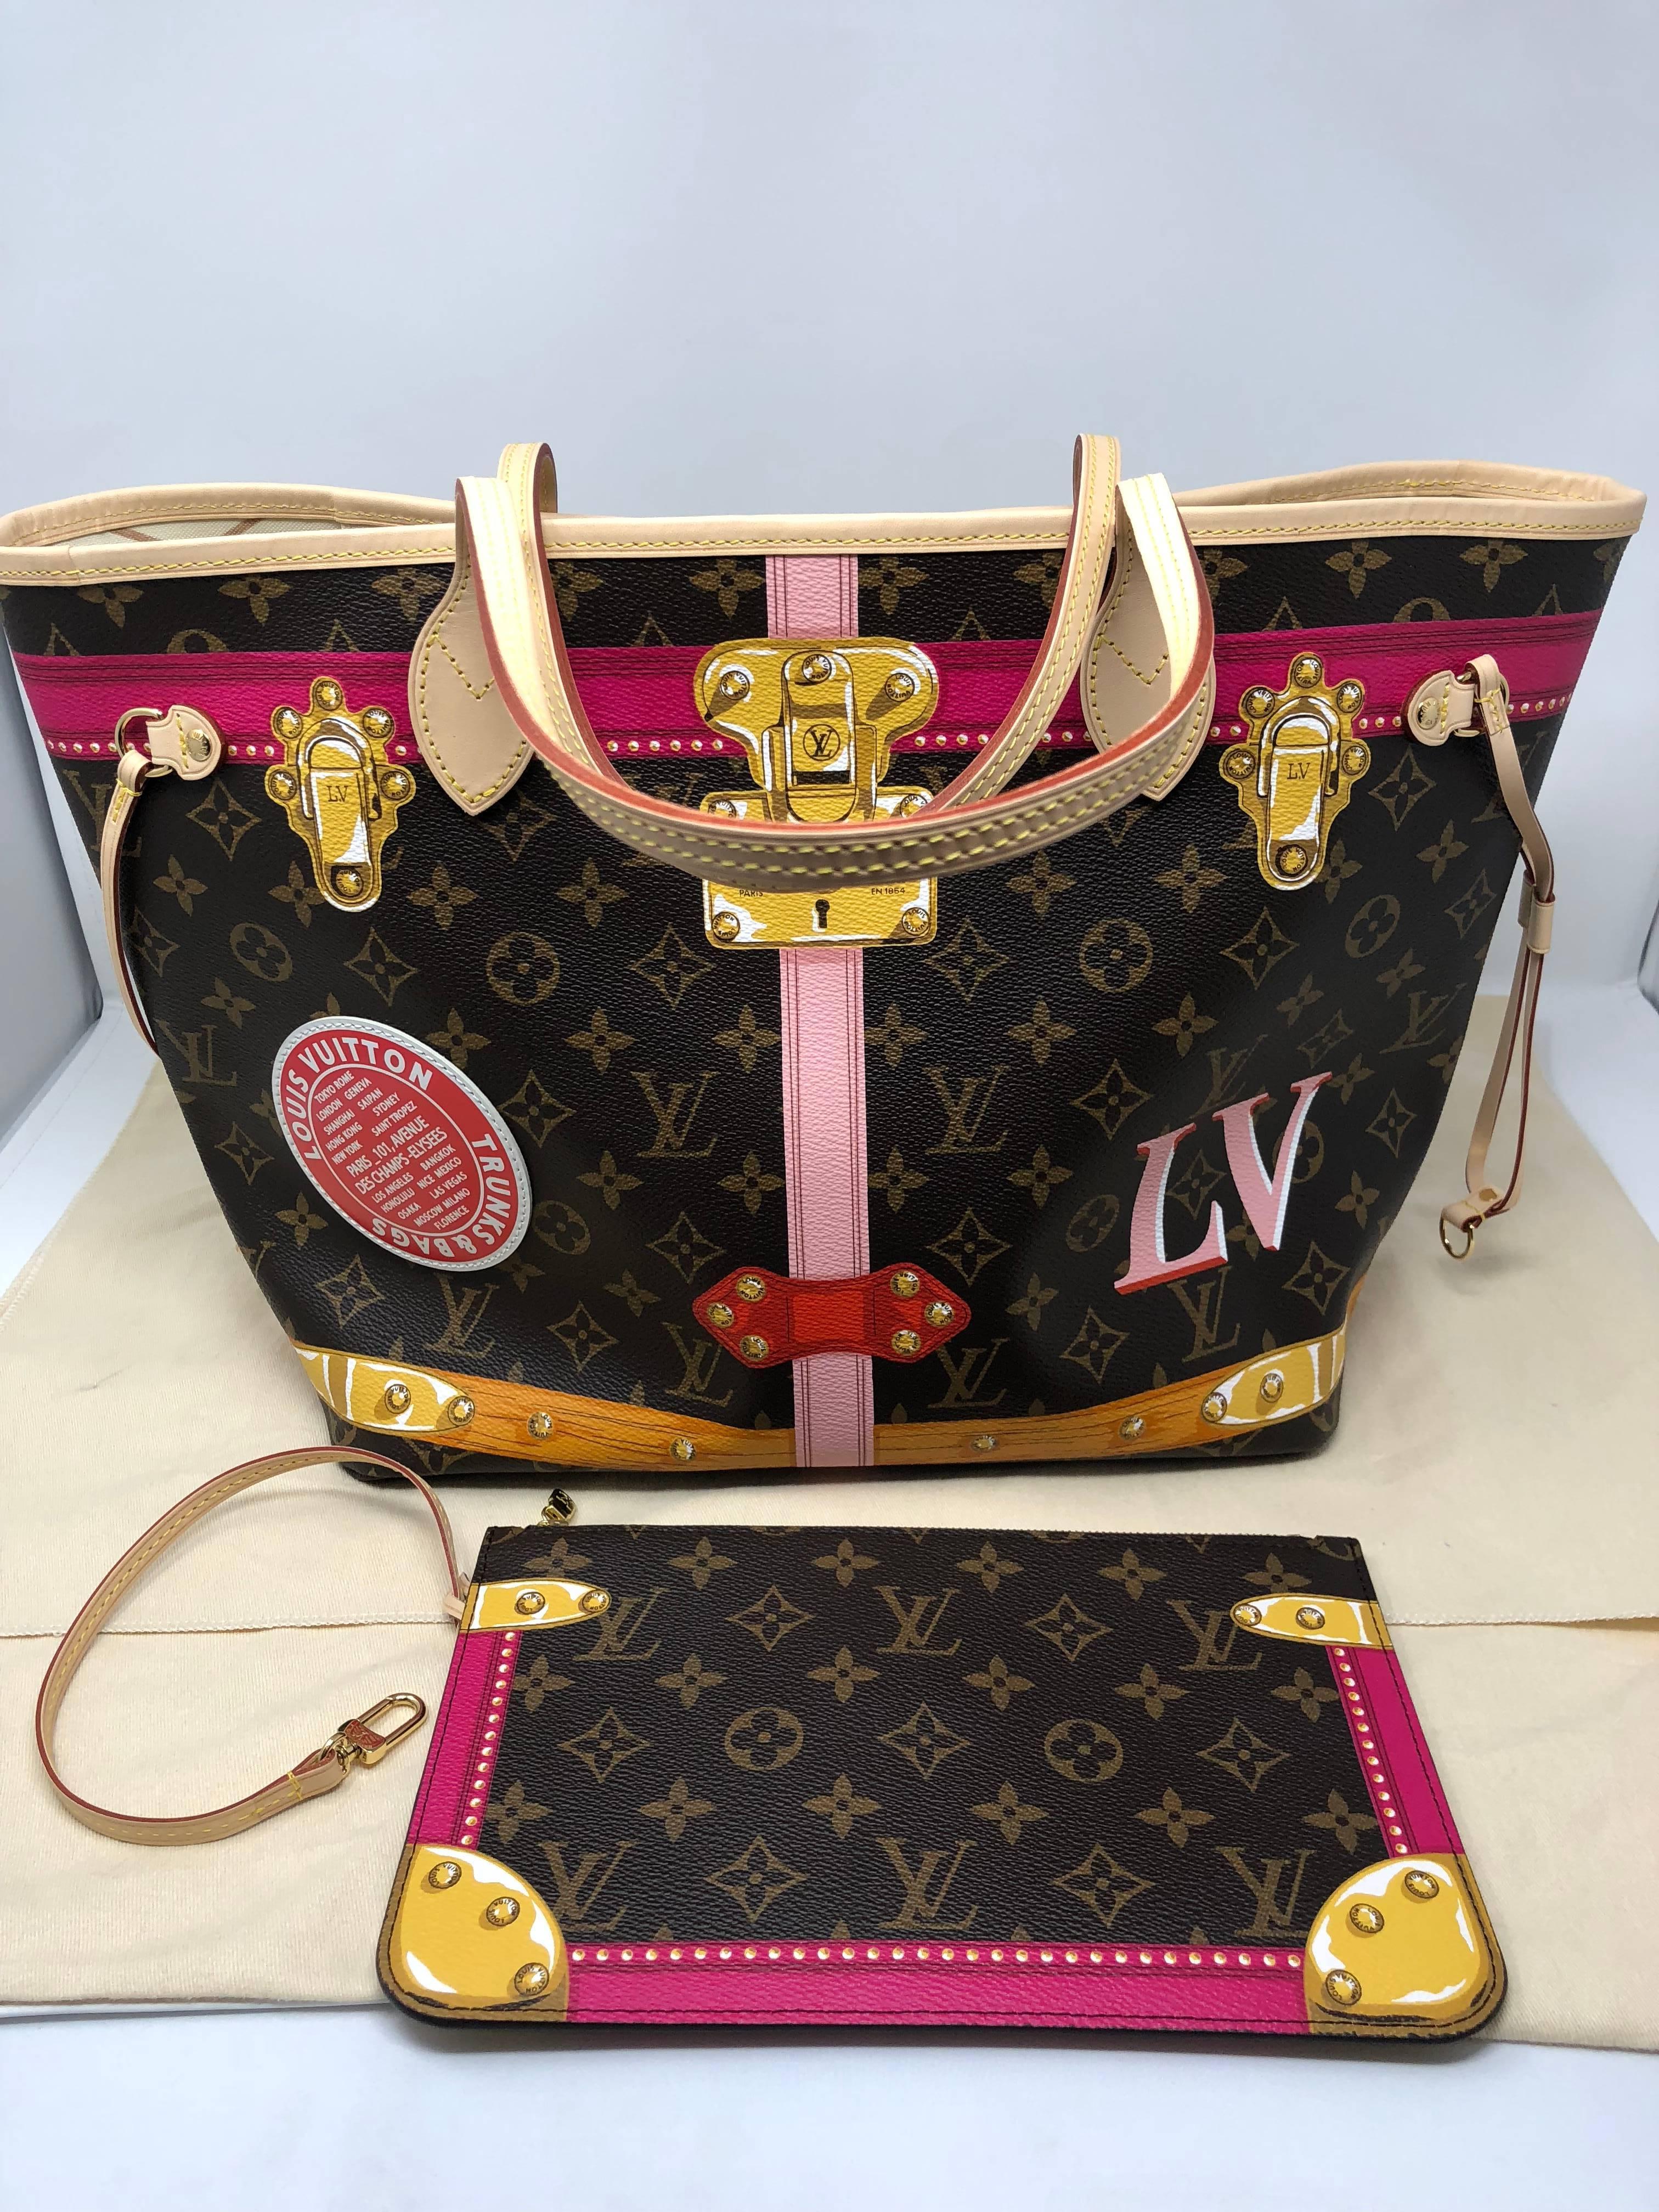 Louis Vuitton 2018 Trunks Collection. Very limited and sold out. This Neverfull MM comes with the pouch that can be worn seperately as a clutch or other purse. Brand new and never used. Guaranteed authentic. Will include dust cover. 